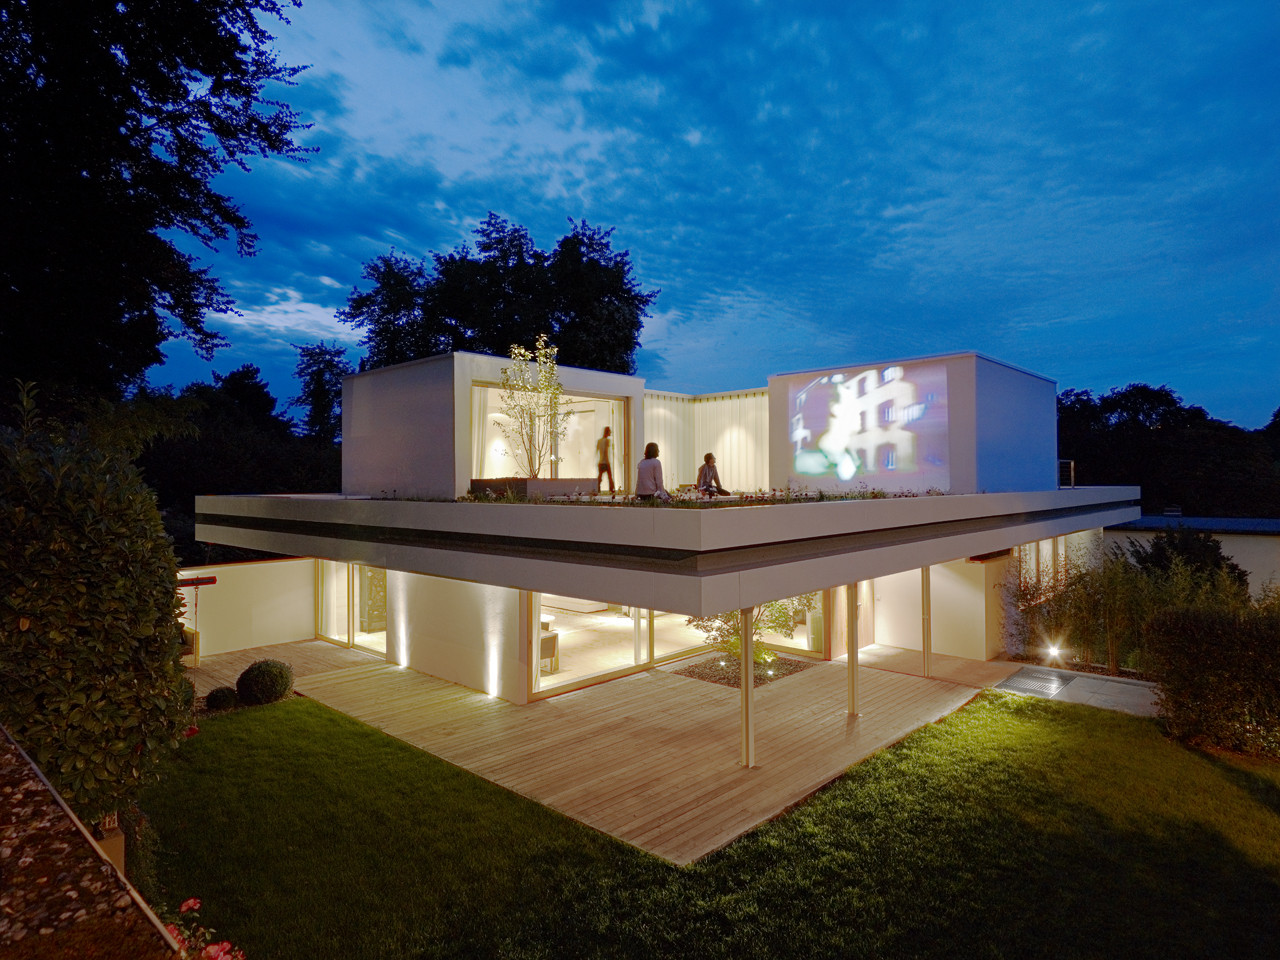 House S In Germany By Roger Christ